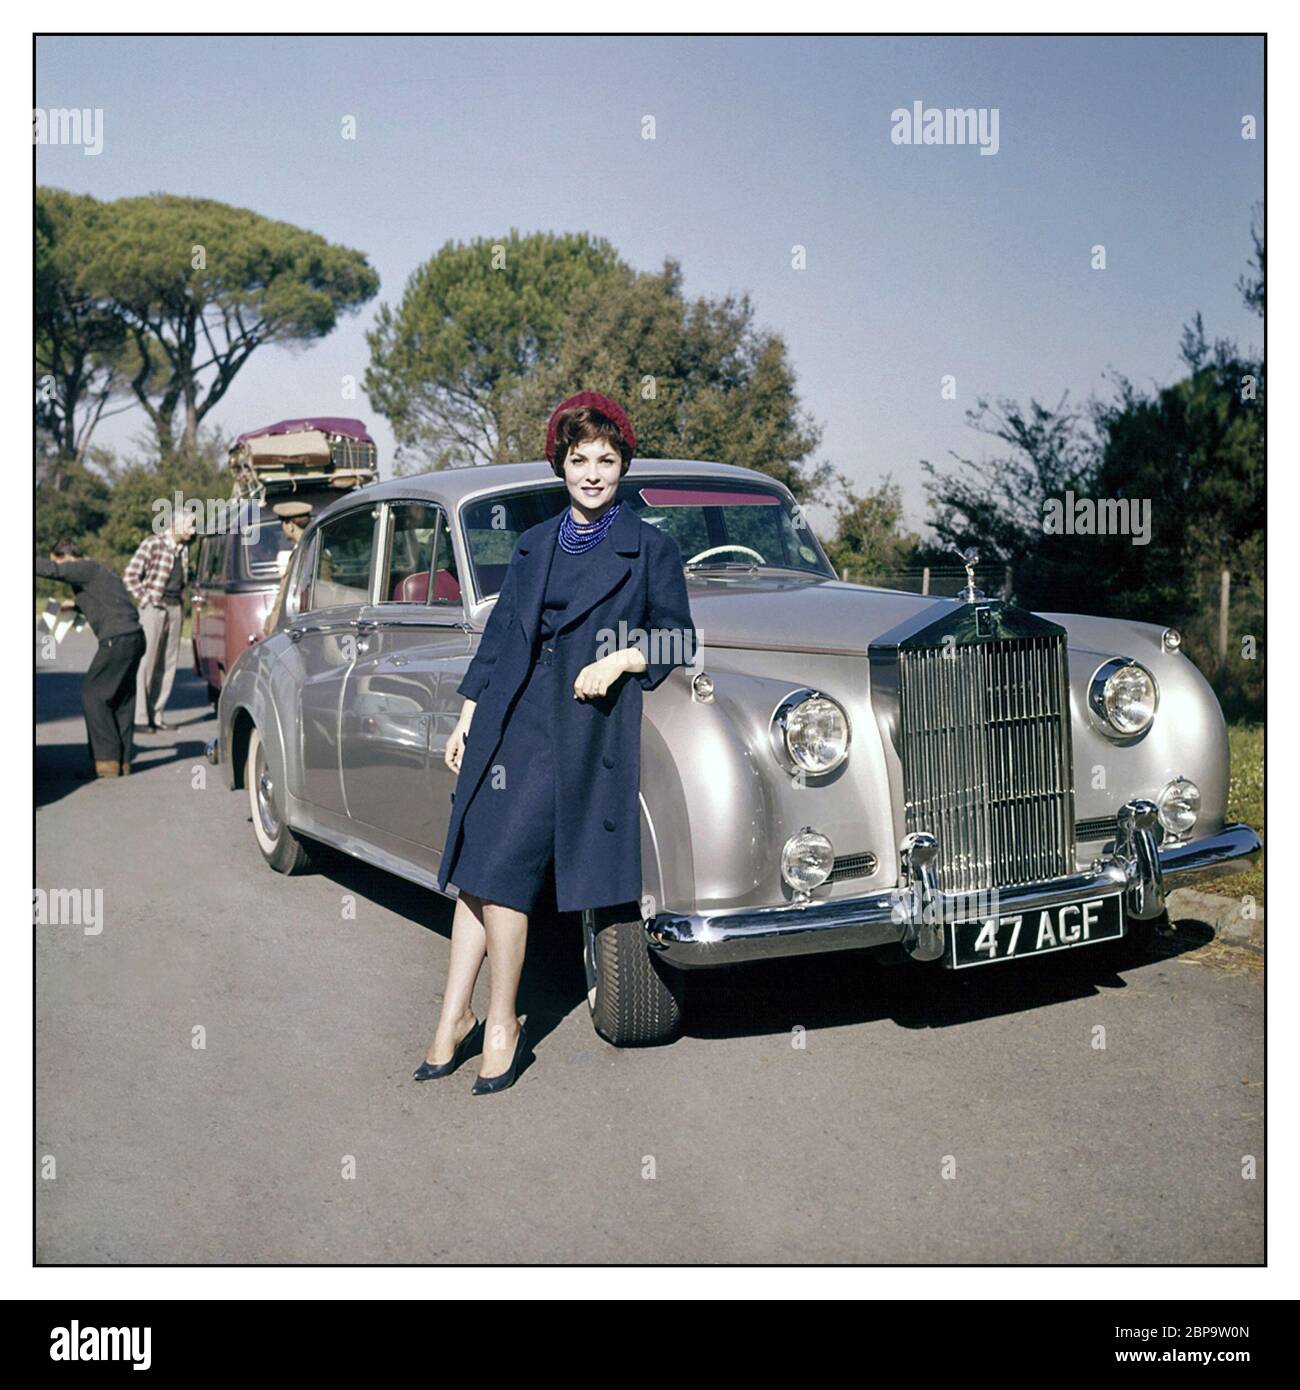 Vintage Rolls-Royce Silver Cloud I with owner Gina Lollobrigida on a film location, Gina Lollobrigida, is an Italian actress, photojournalist and sculptor. She was one of the highest-profile and most beautiful European actresses of the 1950s/1960's Stock Photo